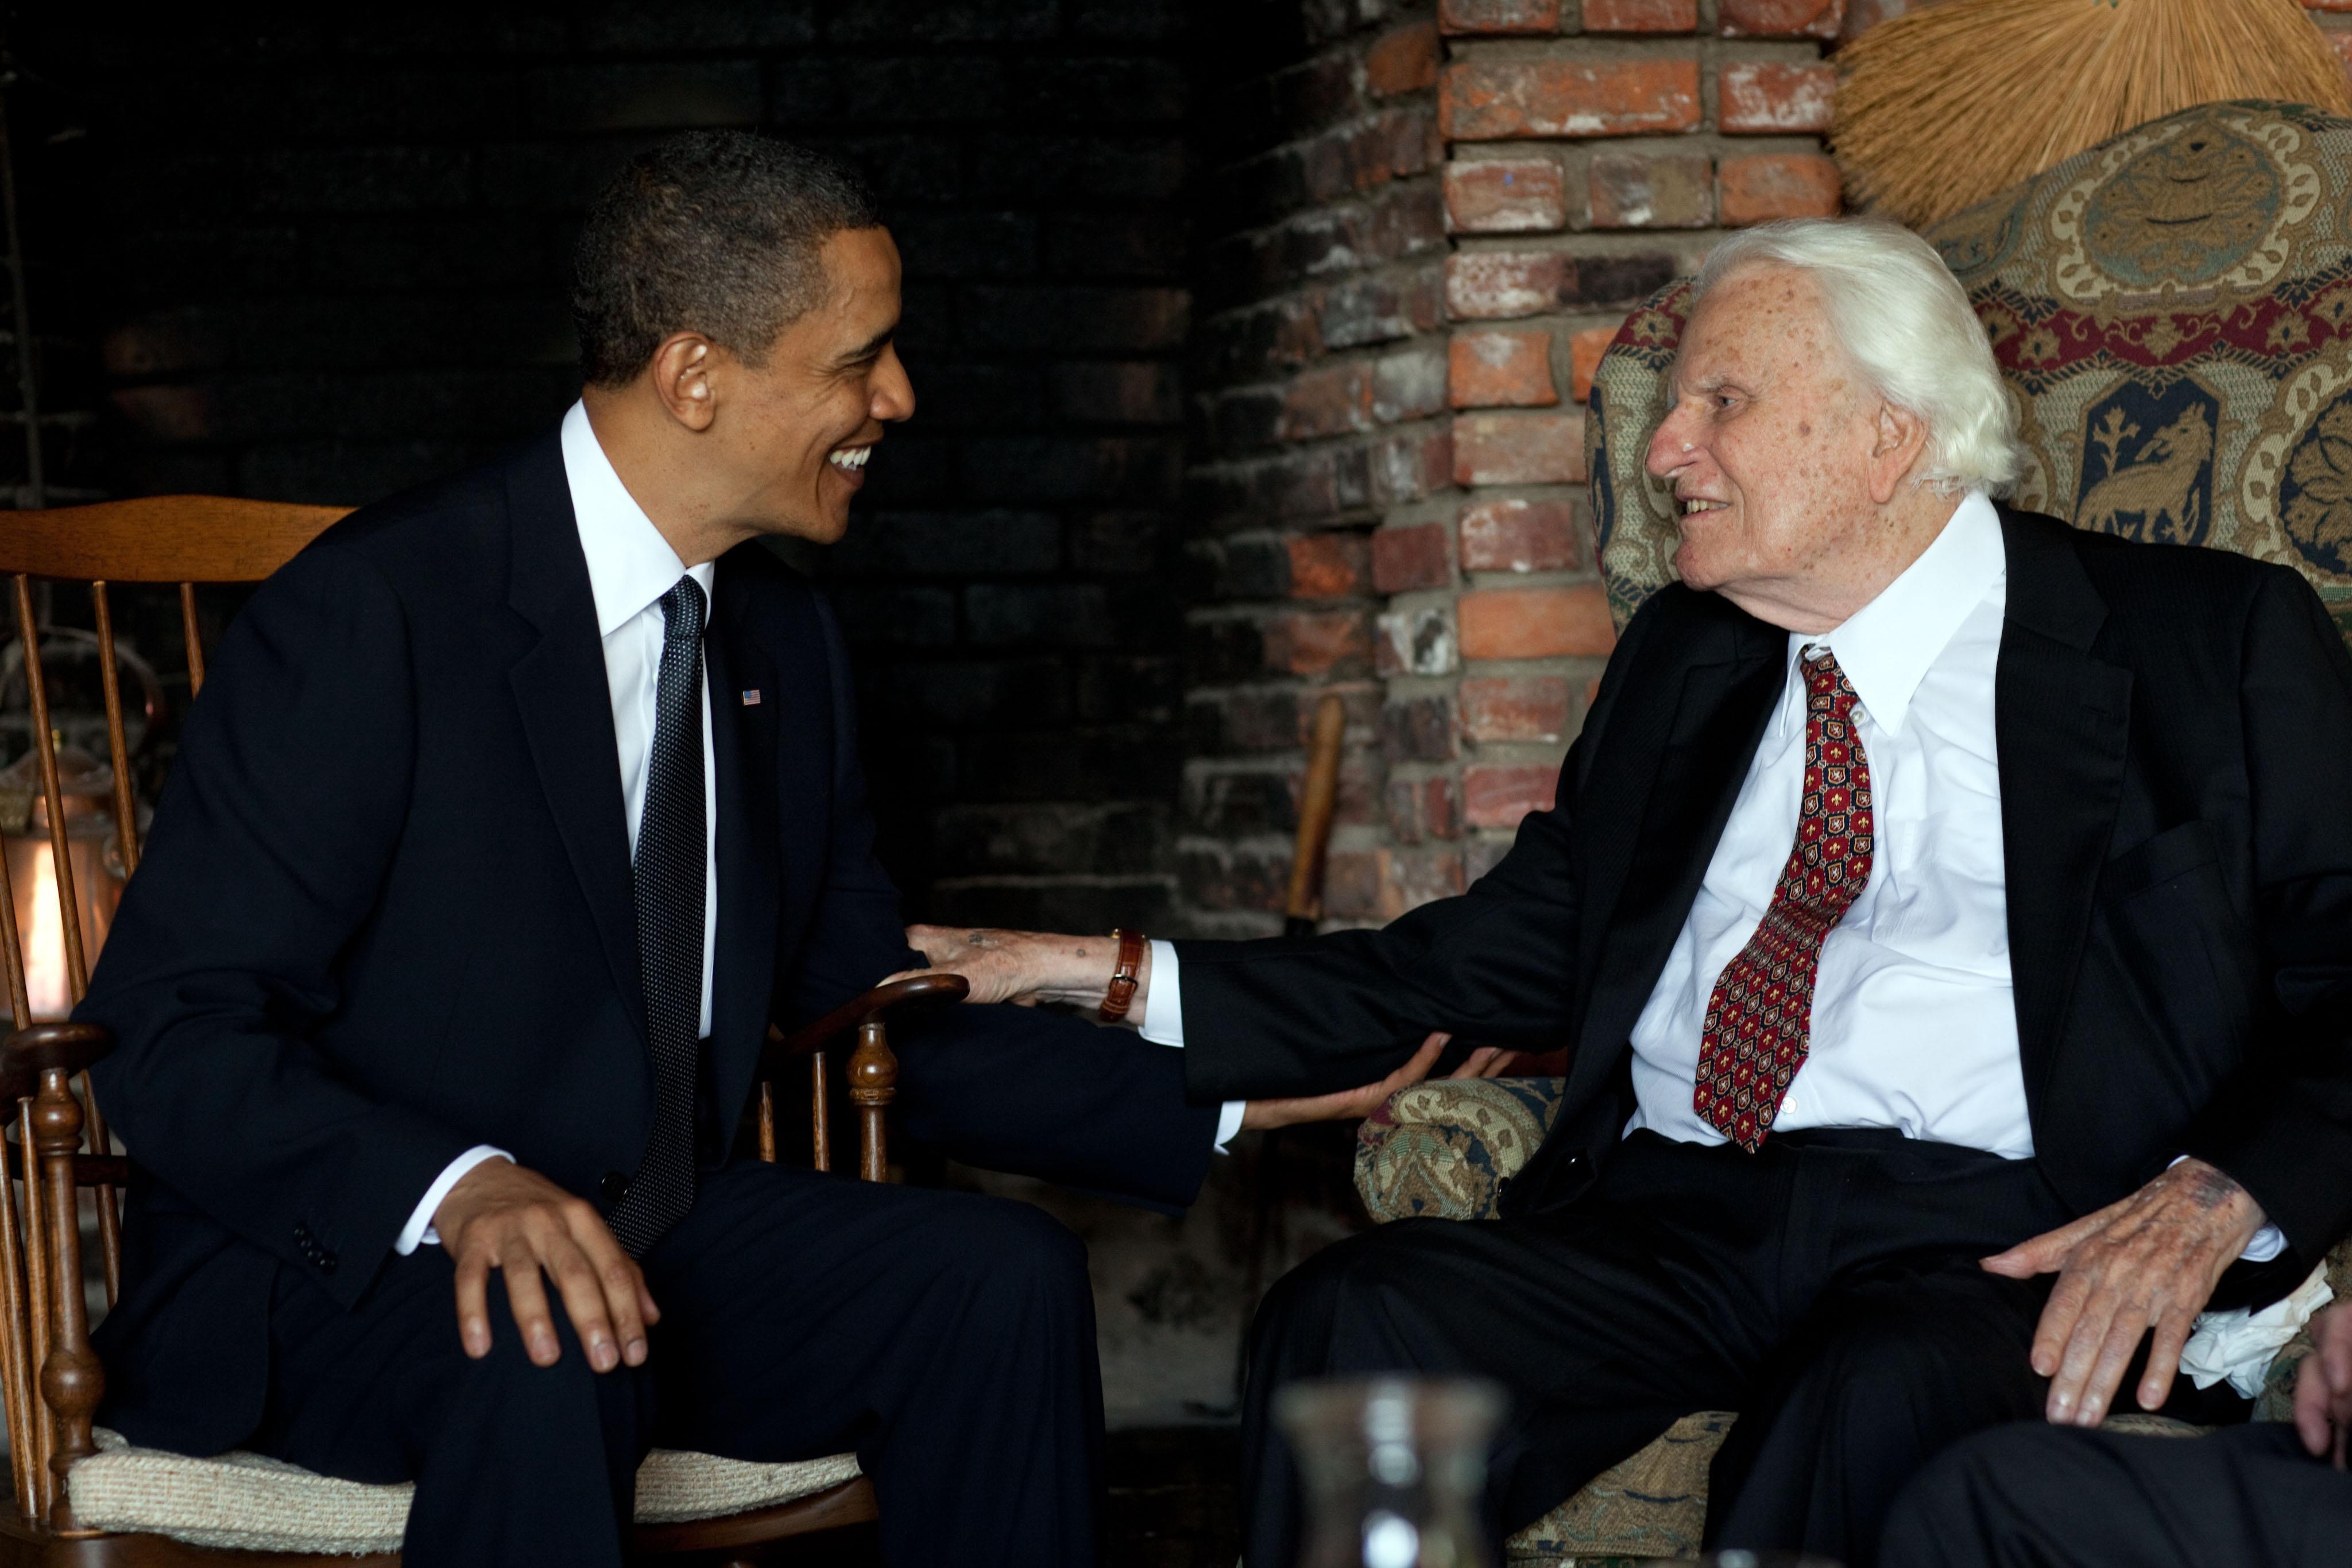 President Barack Obama meets with Rev. Billy Graham at his house in Montreat, N.C., April 25, 2010. (Official White House Photo by Pete Souza)